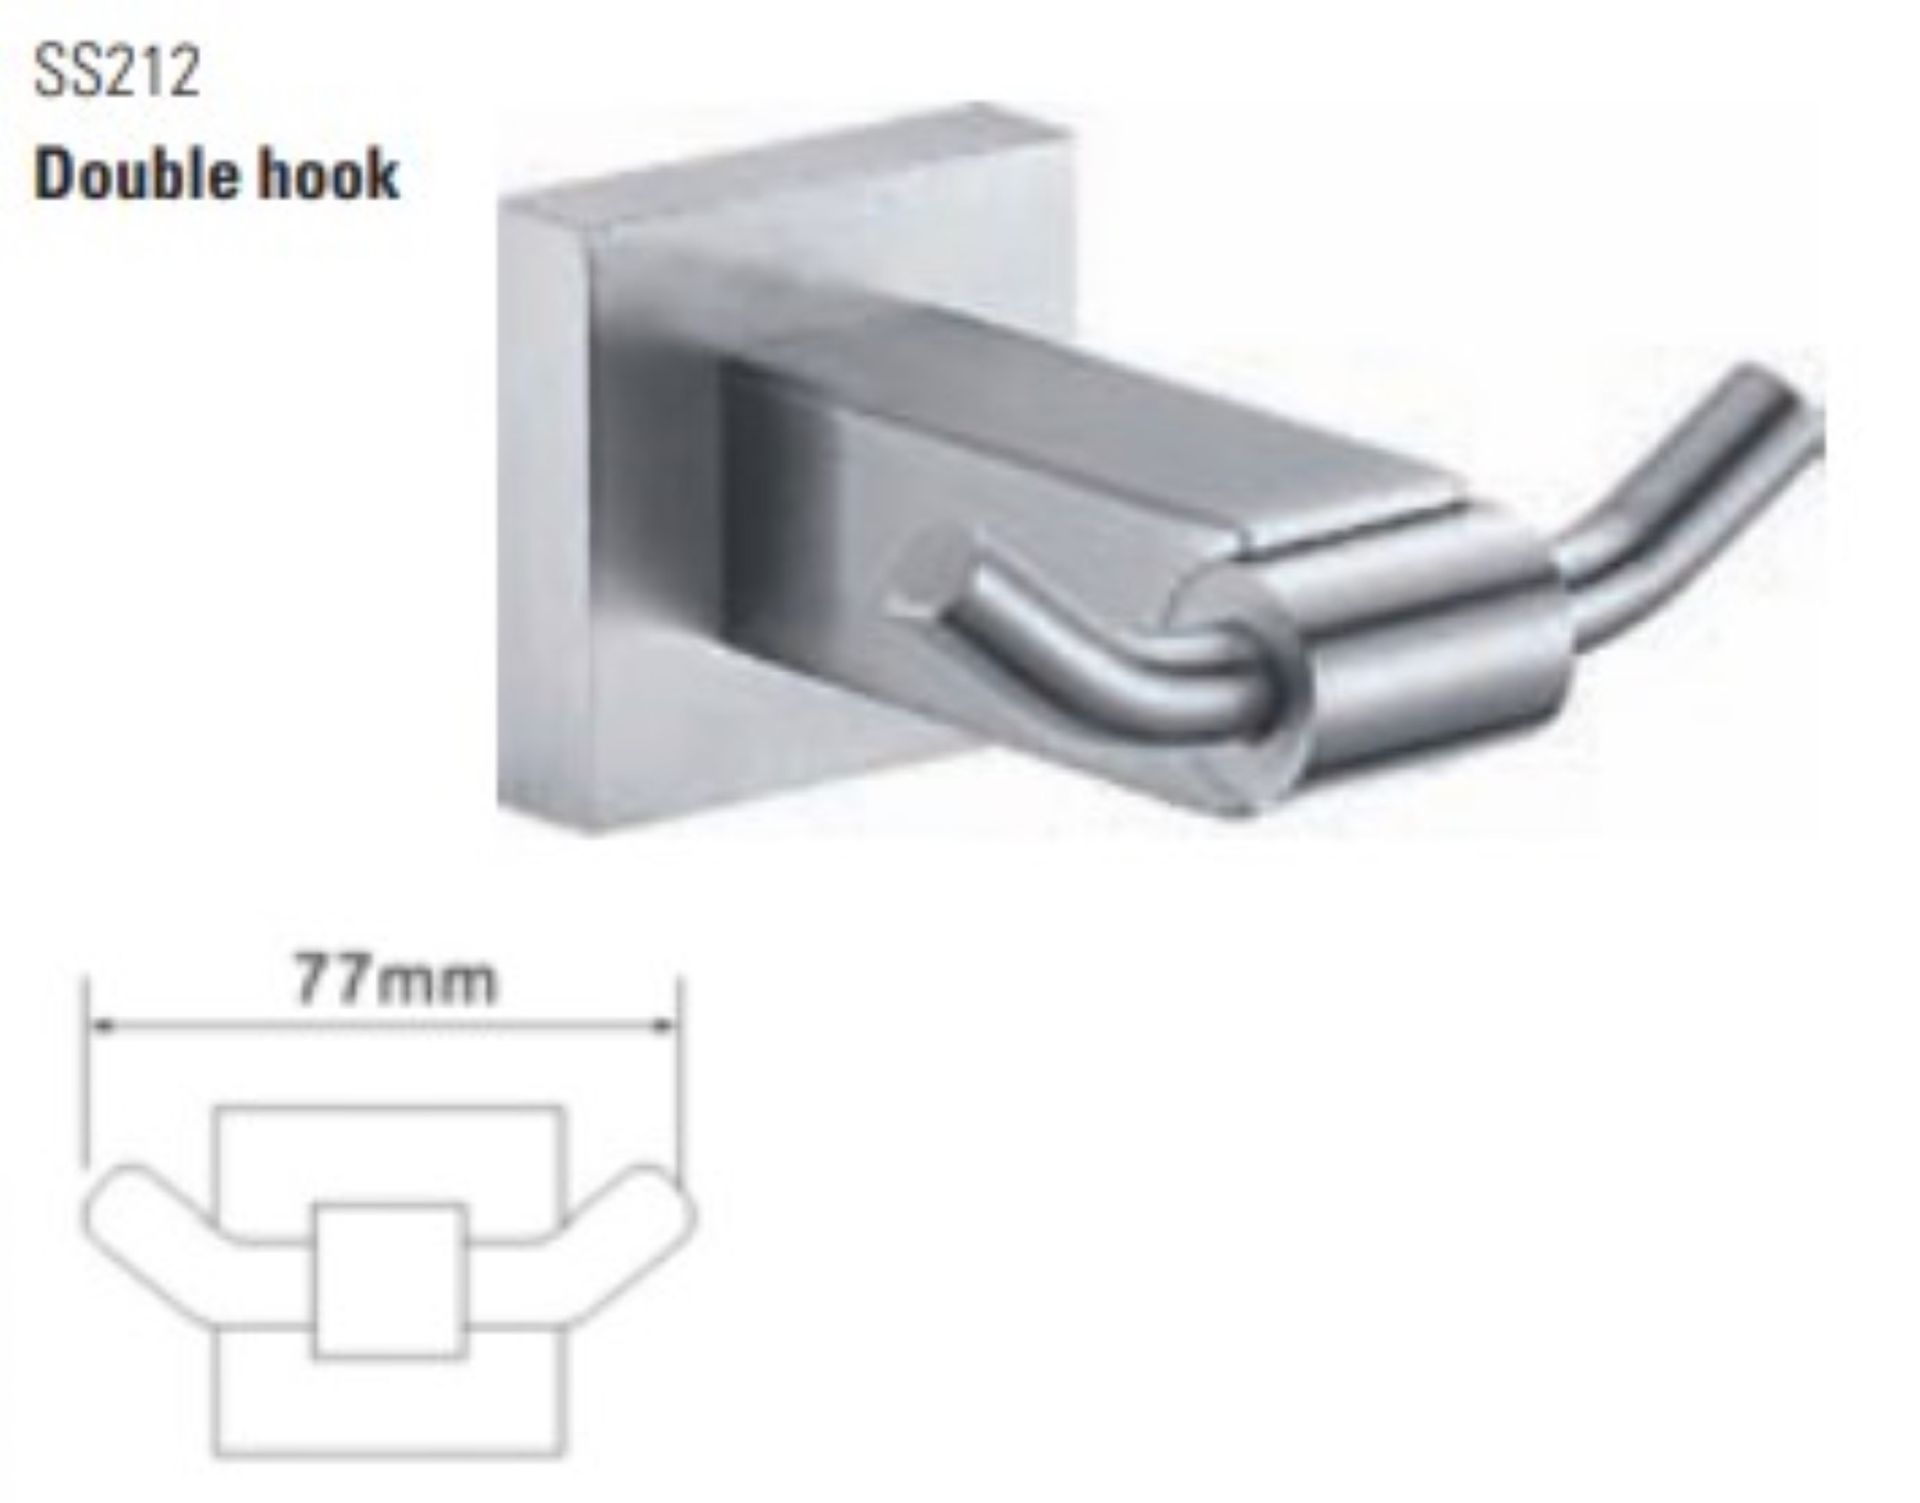 1 x Stonearth Double Robe Hook - Solid Stainless Steel Bathroom Accessory - Brand New & Boxed - Image 2 of 3